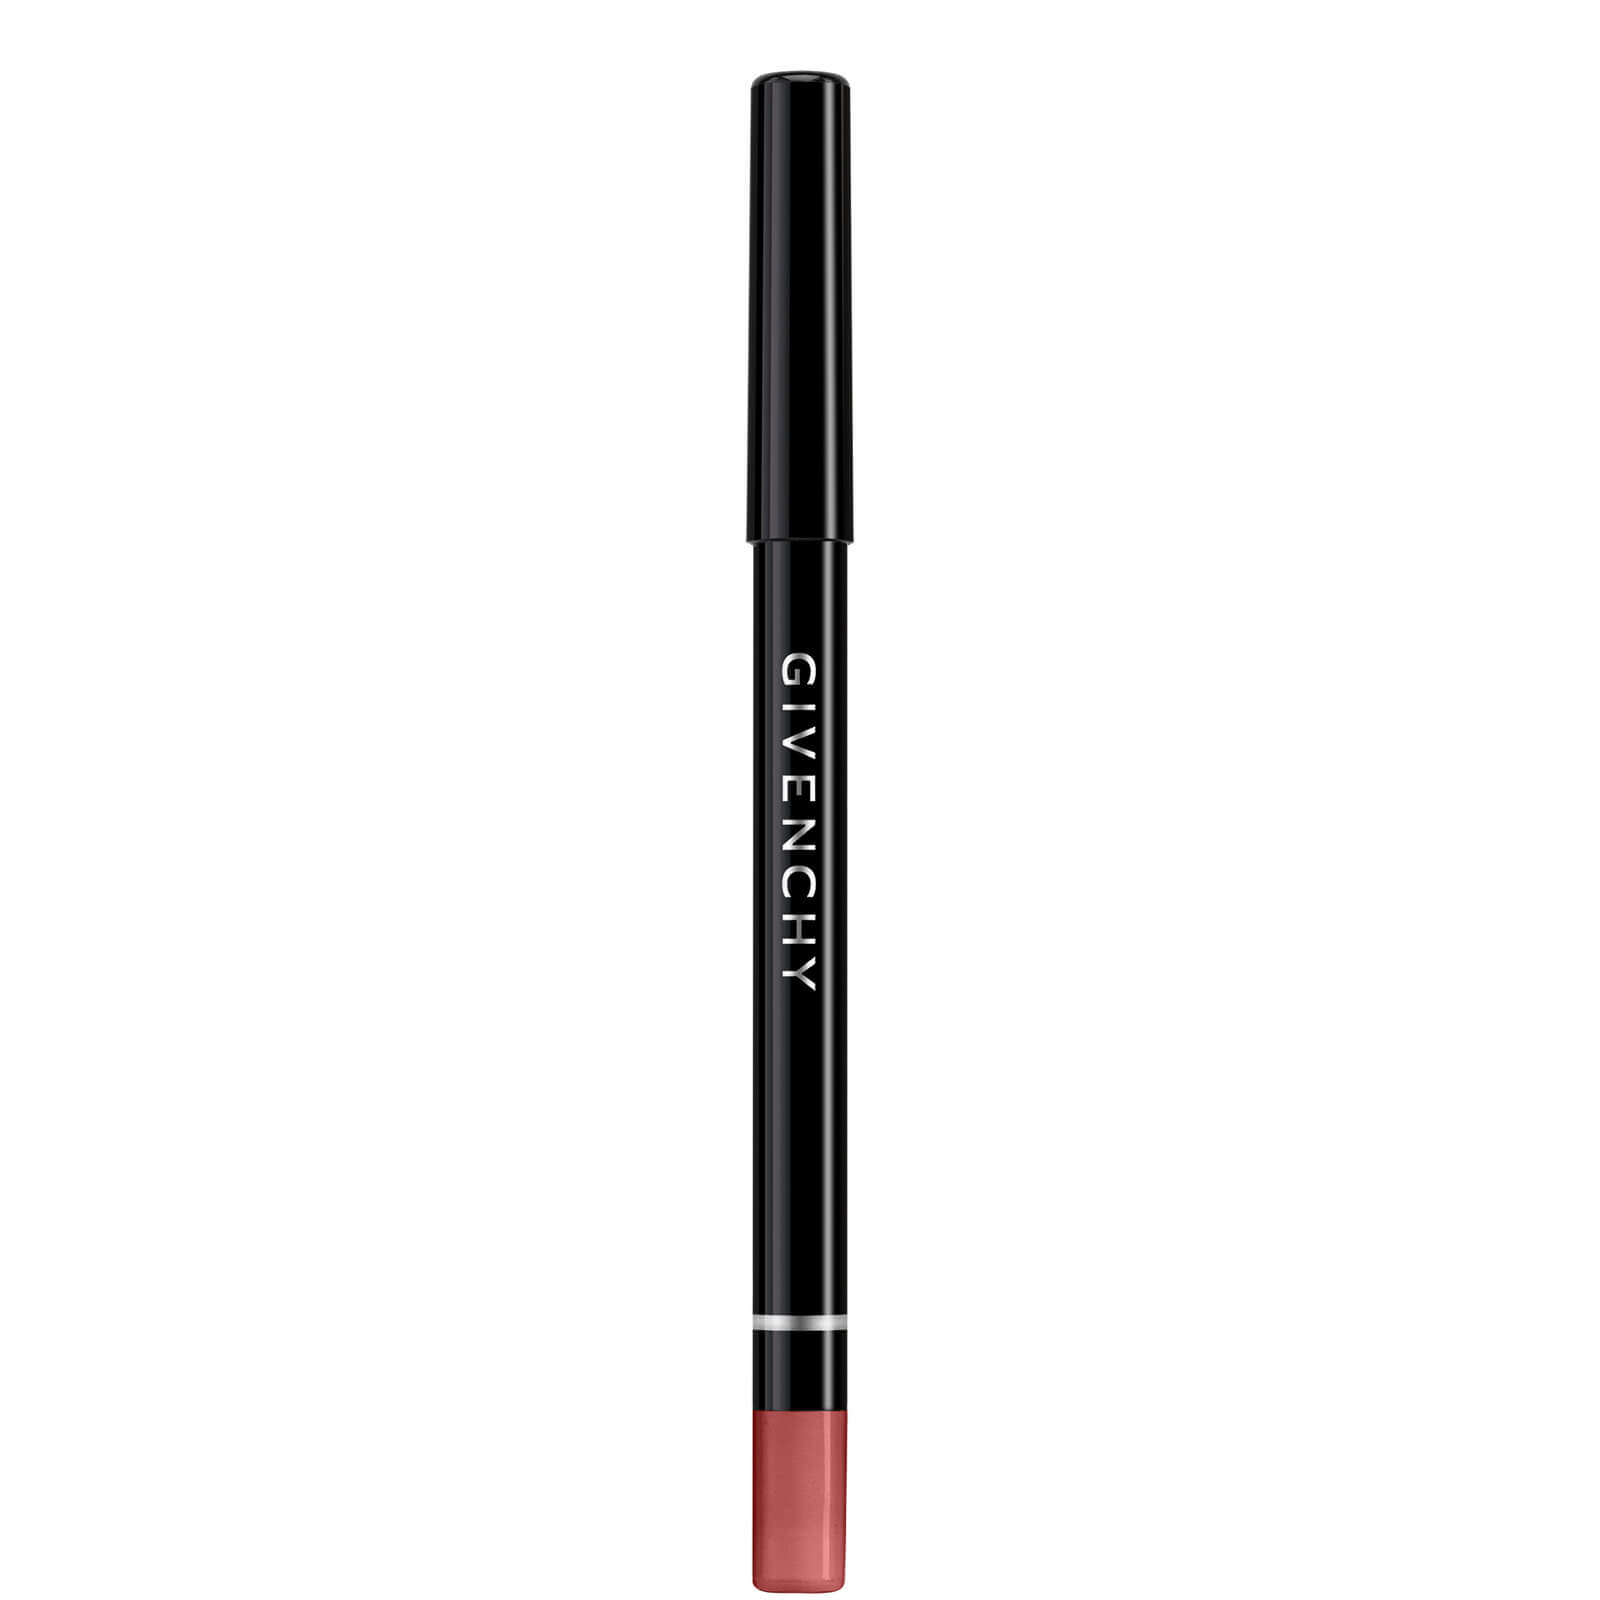 Photos - Lipstick & Lip Gloss Givenchy Lip Liner 14g  - N08 Parme Silhouette P083908 (Various Shades)